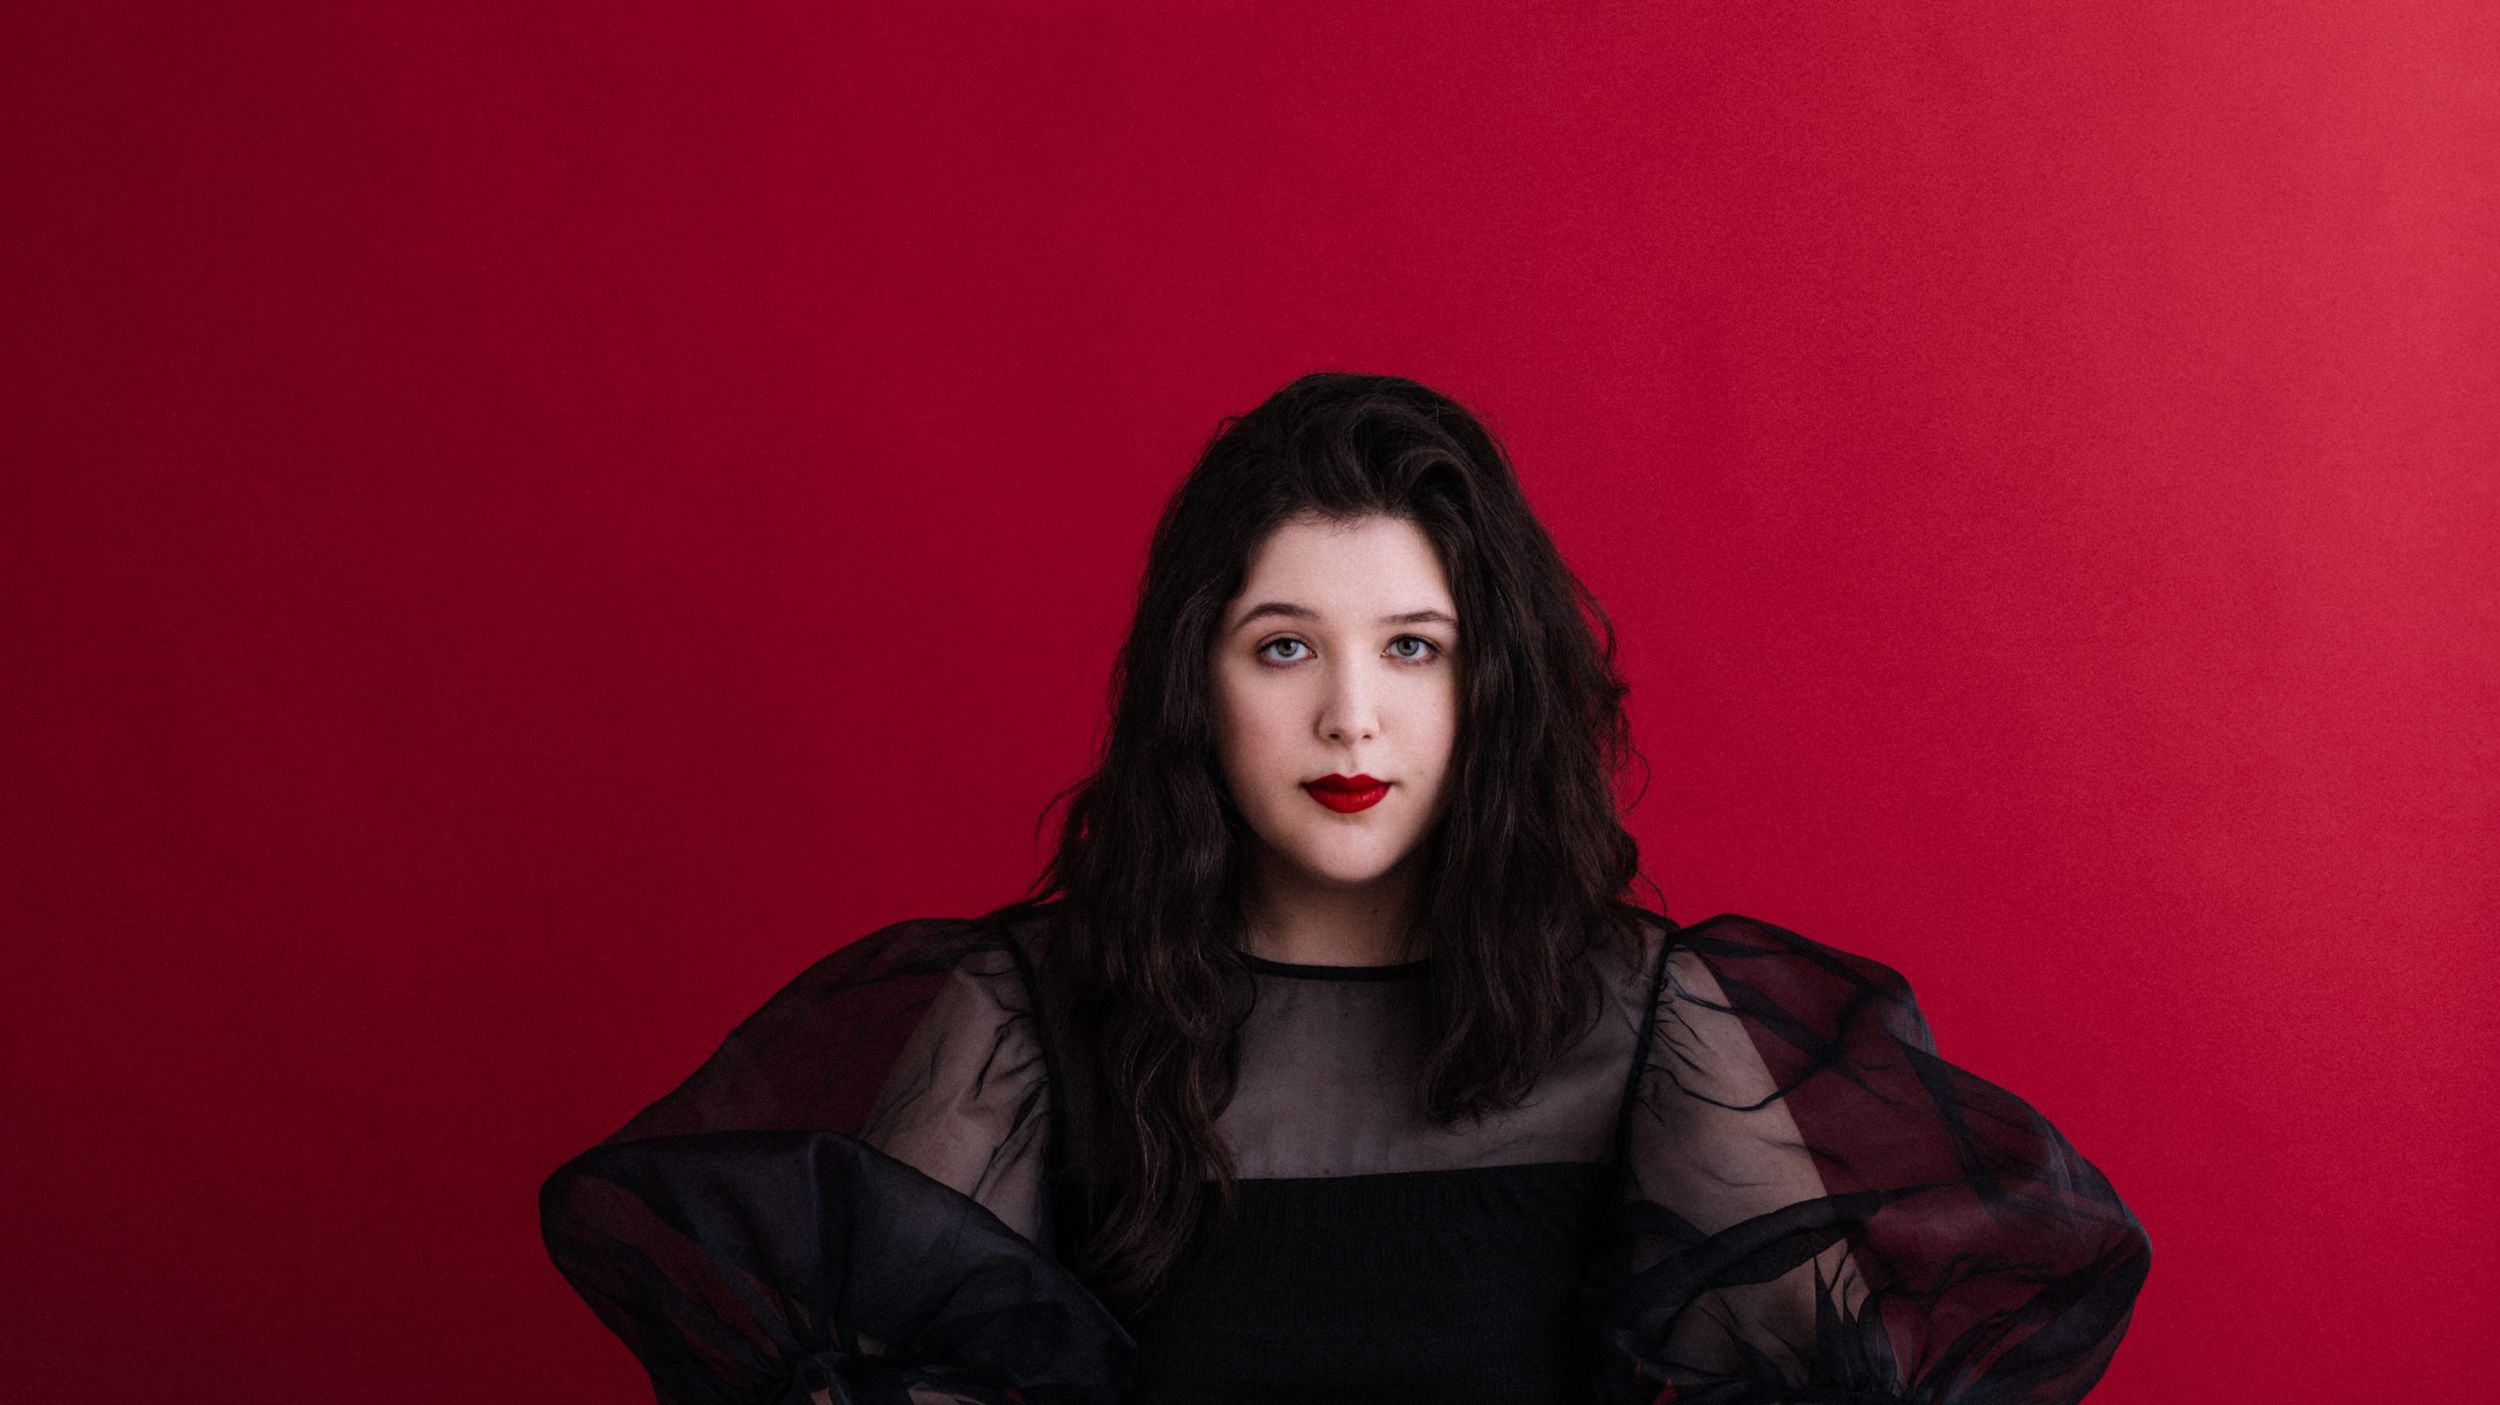 Lucy Dacus takes the 'Night Shift' at Northeastern - The Huntington News